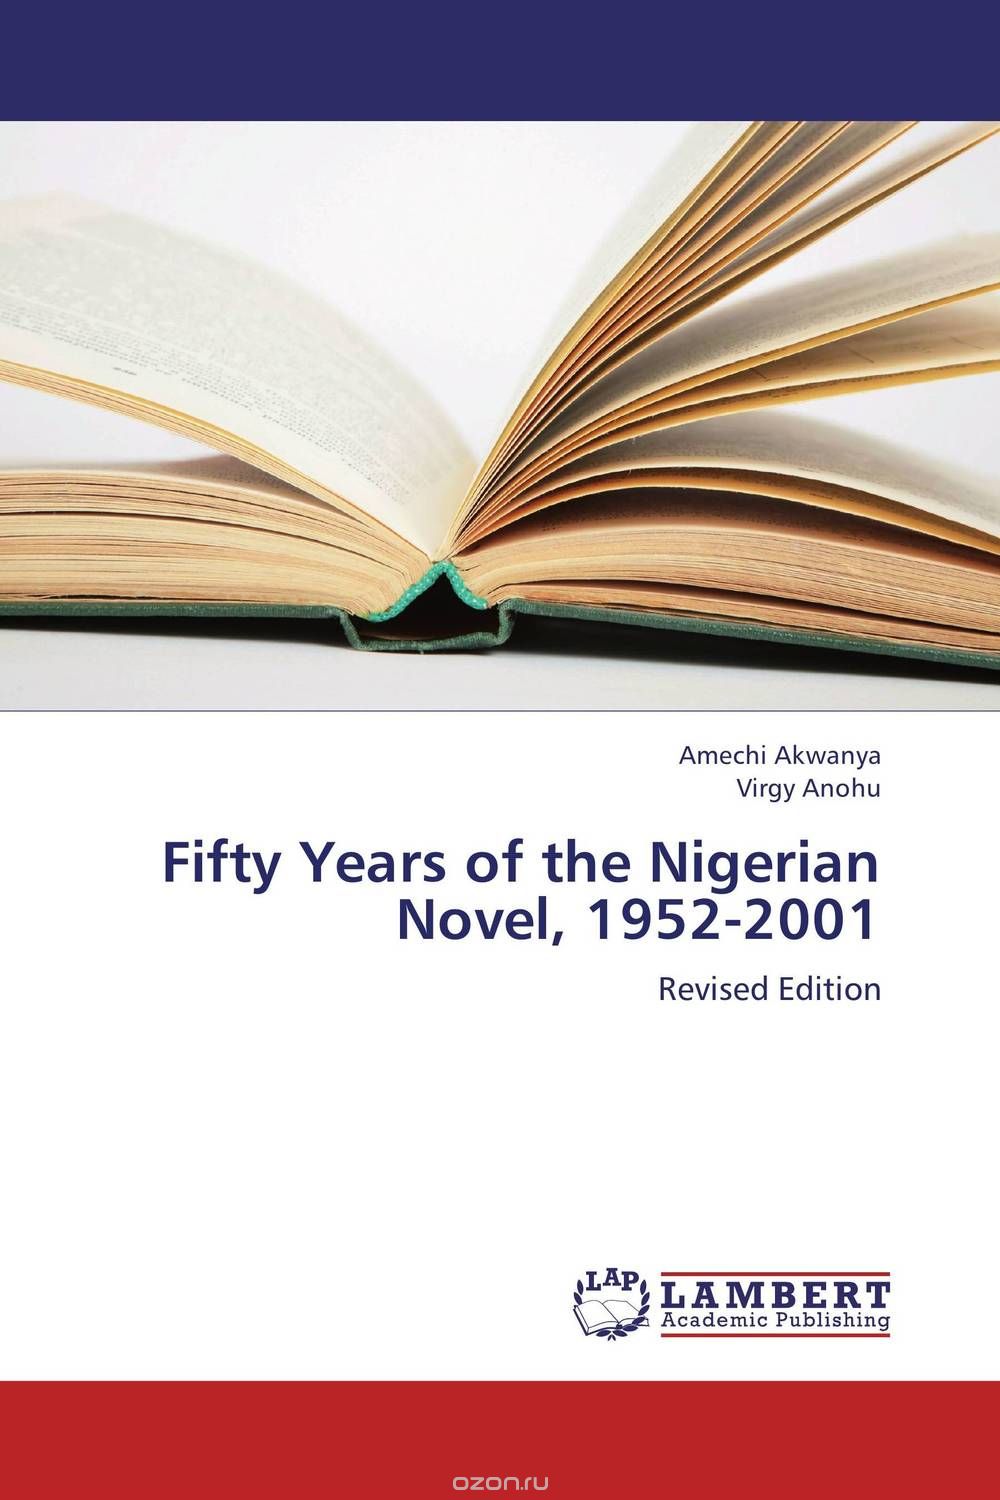 Fifty Years of the Nigerian Novel, 1952-2001